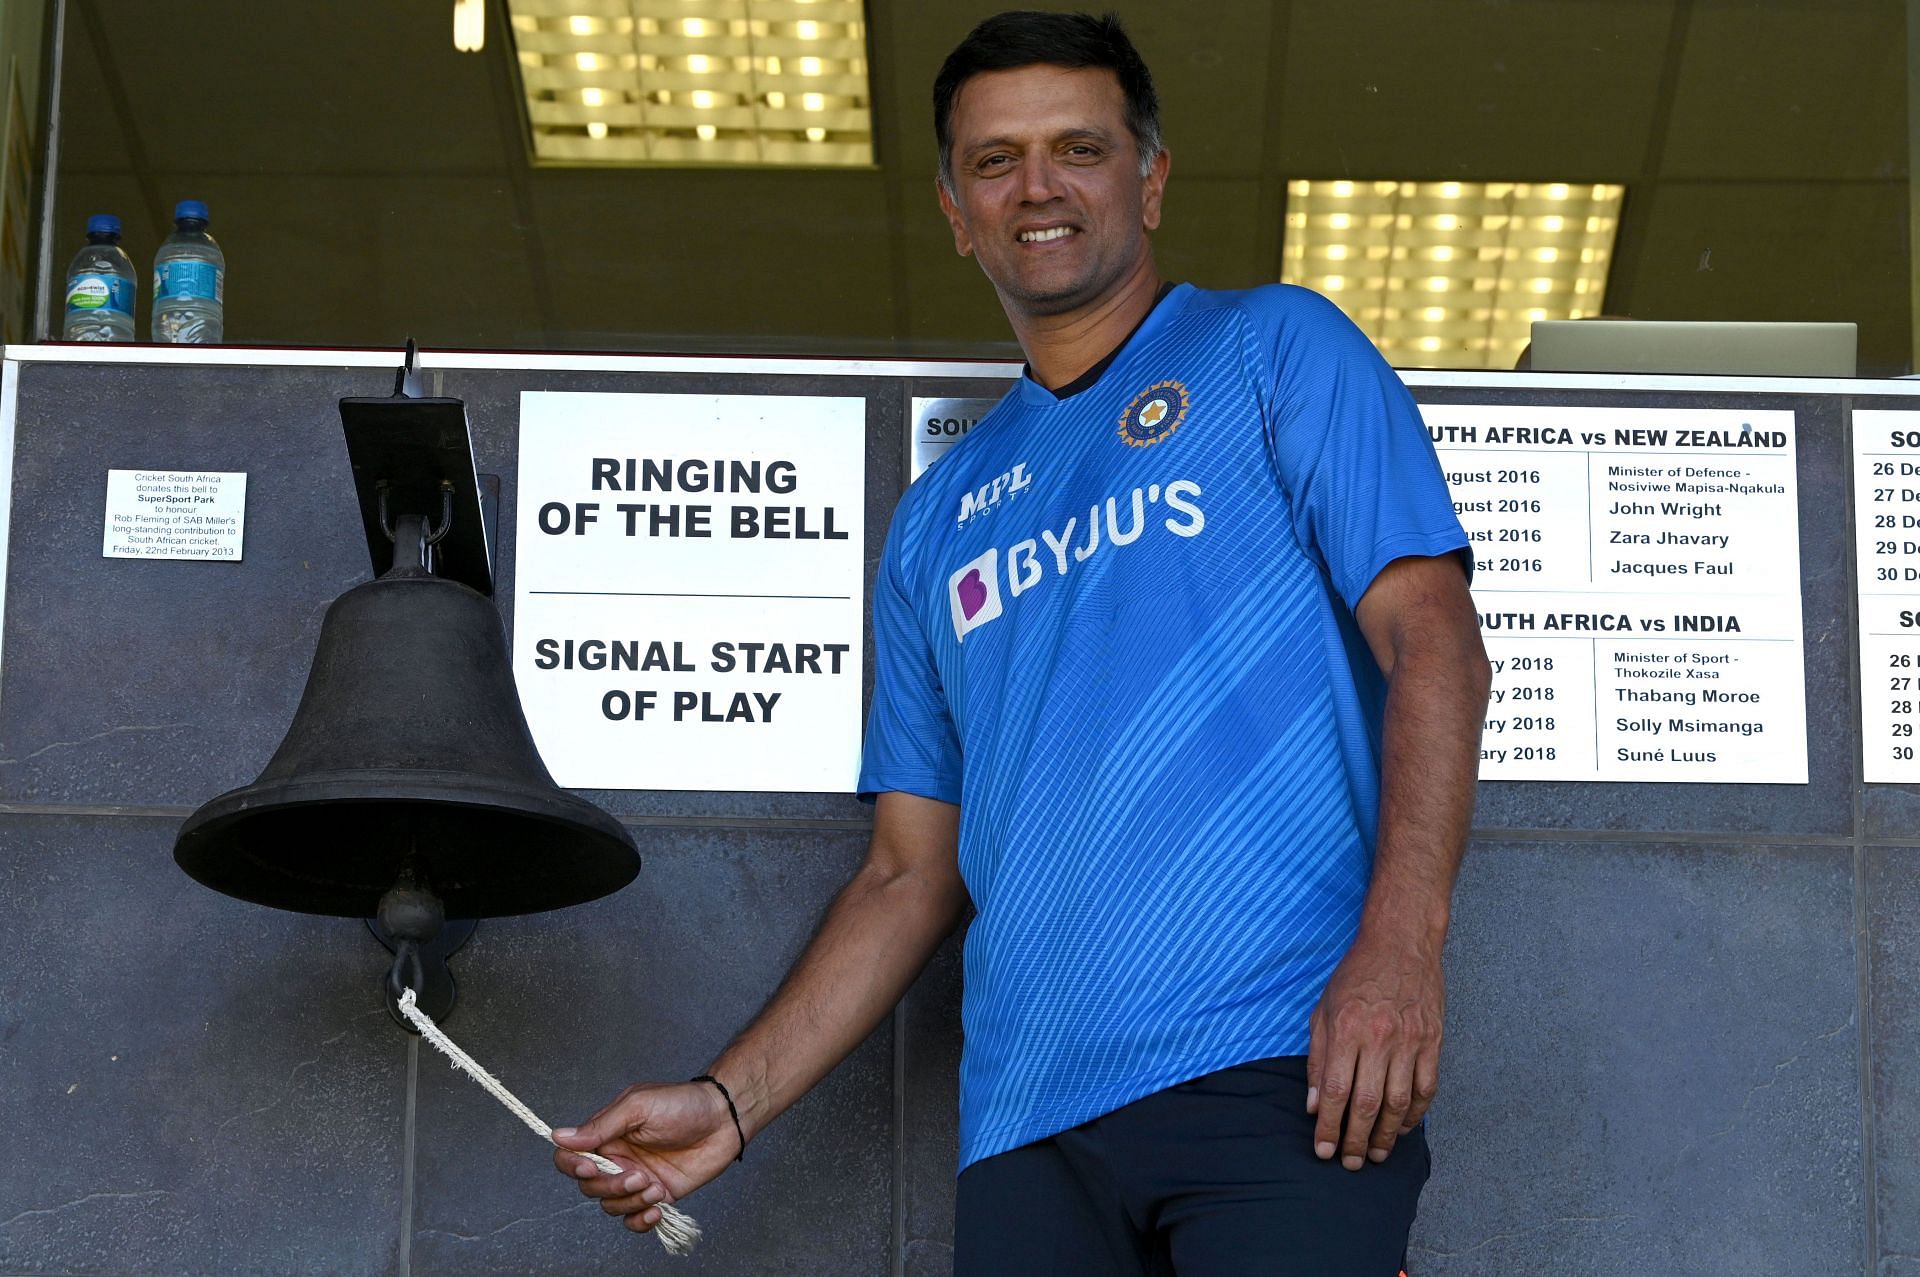 Rahul Dravid is currently the head coach of Team India